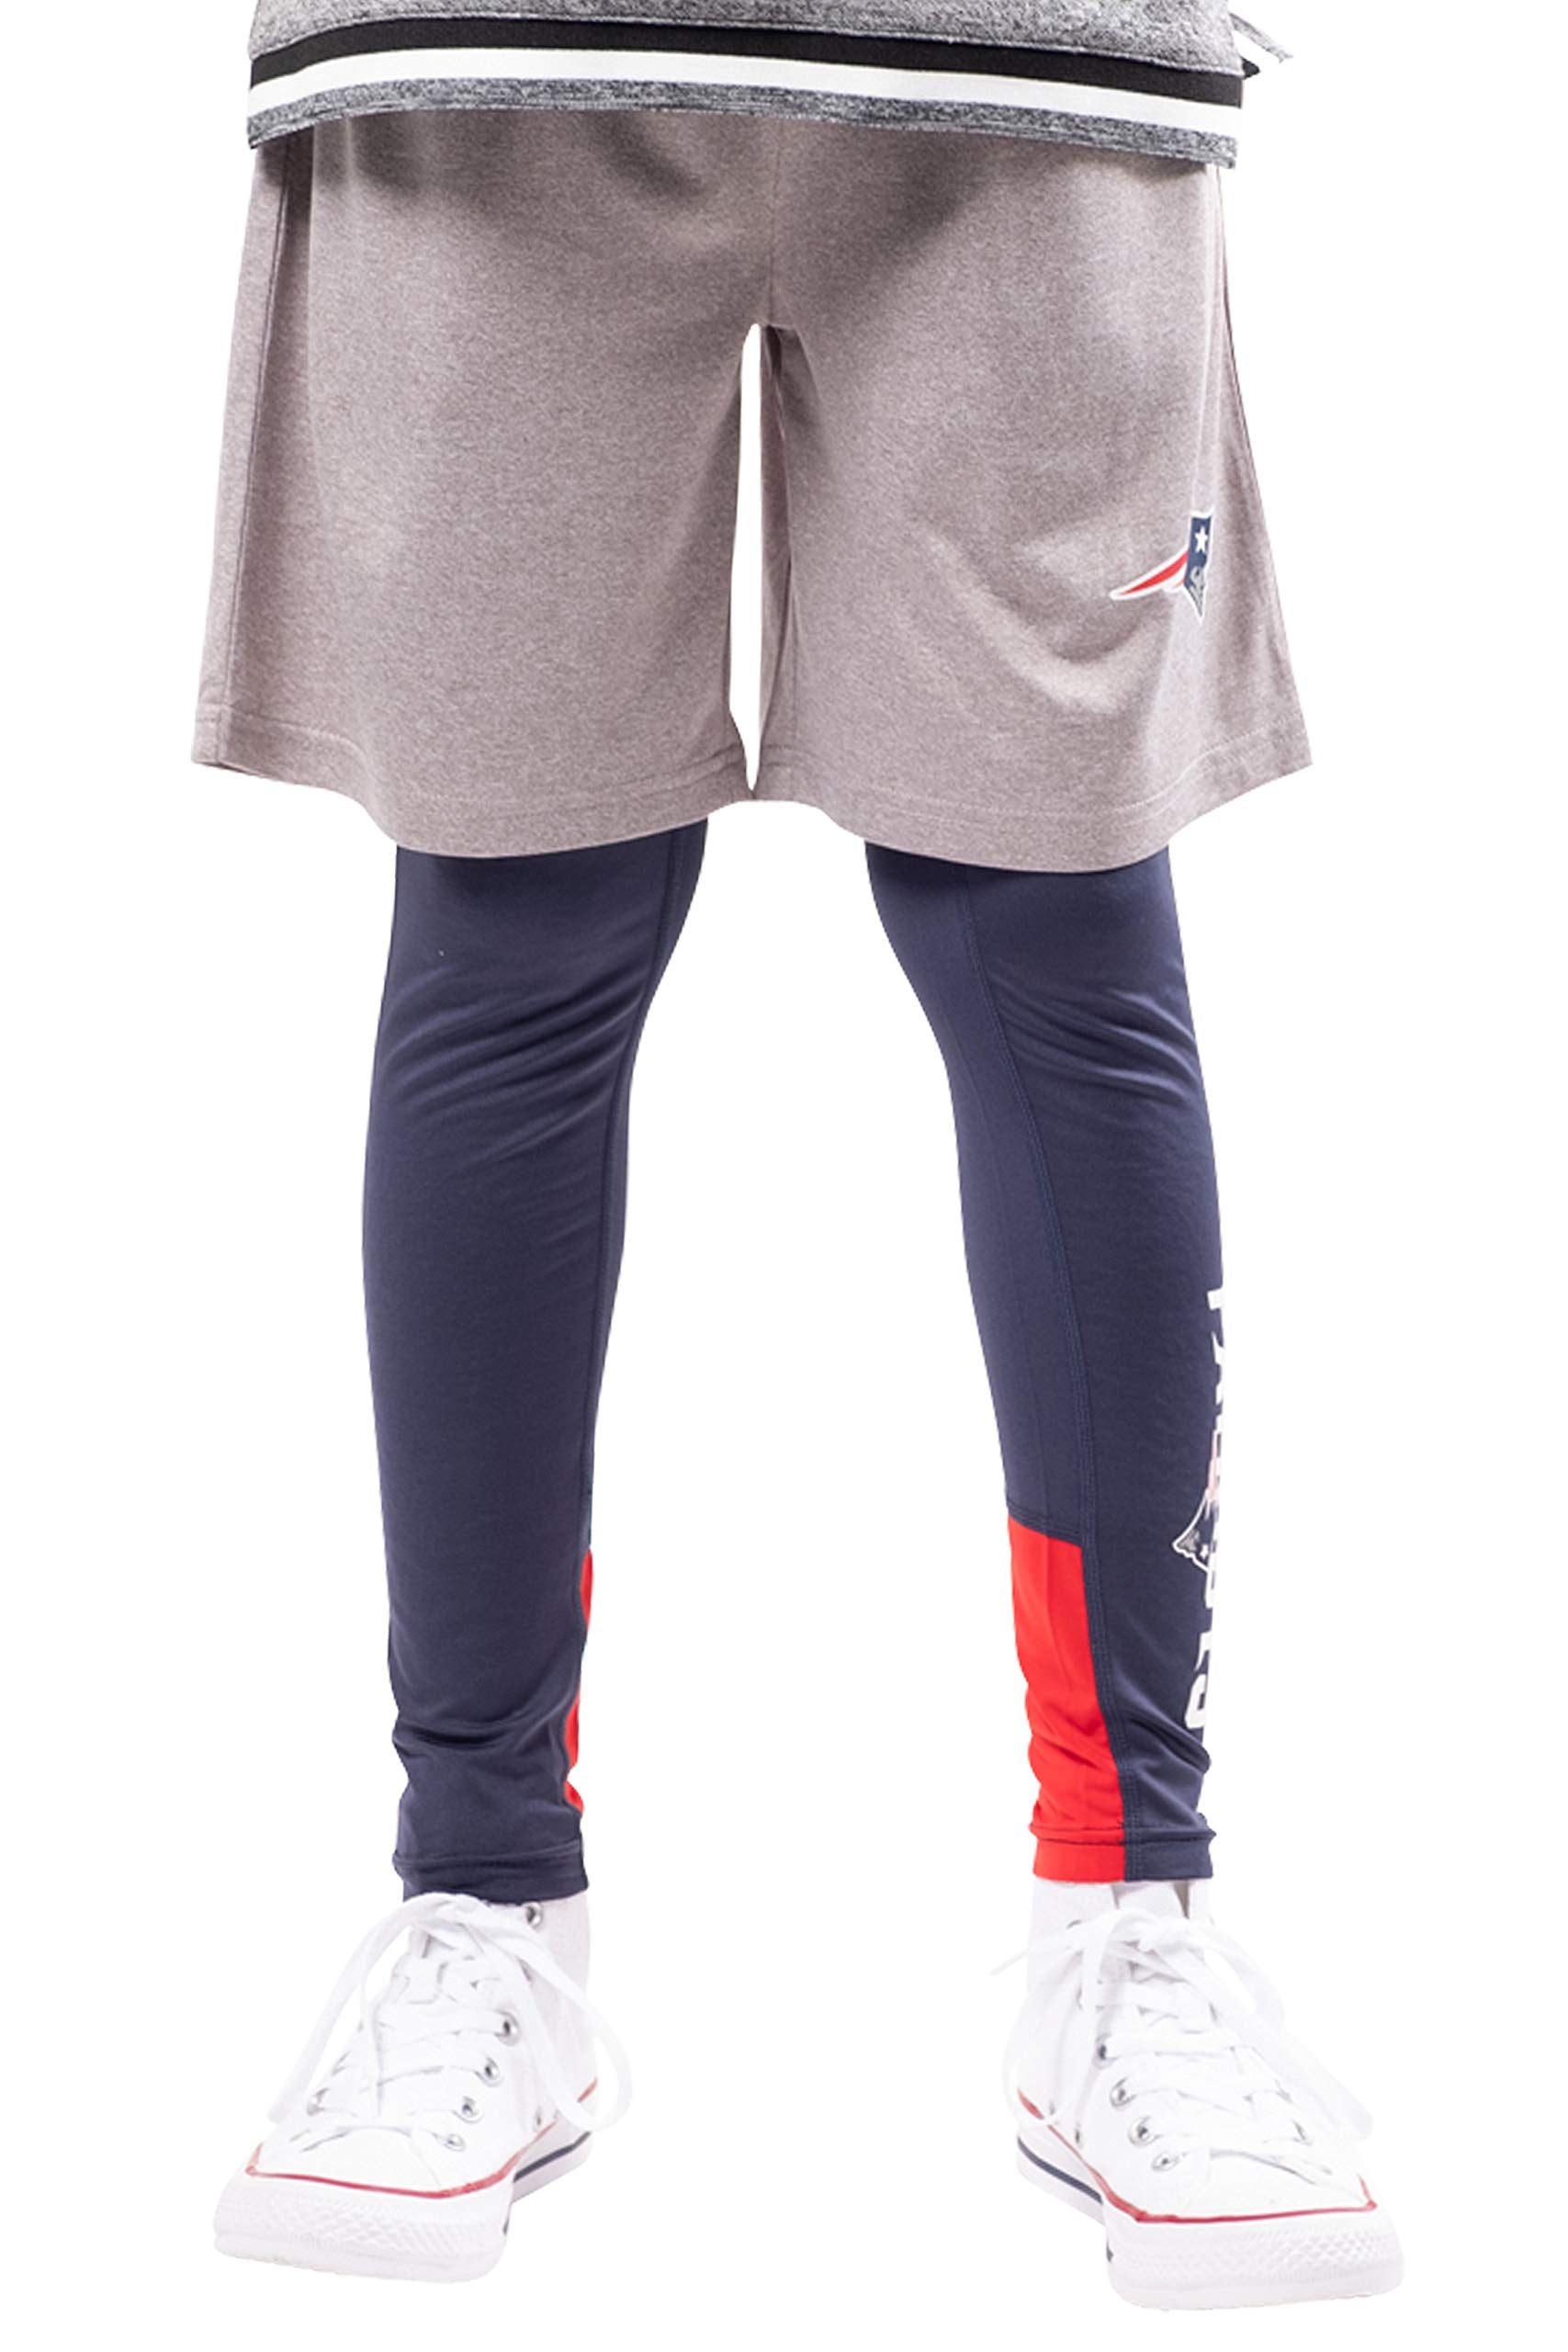 Ultra Game NFL New England Patriots Youth 2 Piece Leggings & Shorts Training Compression Set|New England Patriots - UltraGameShop